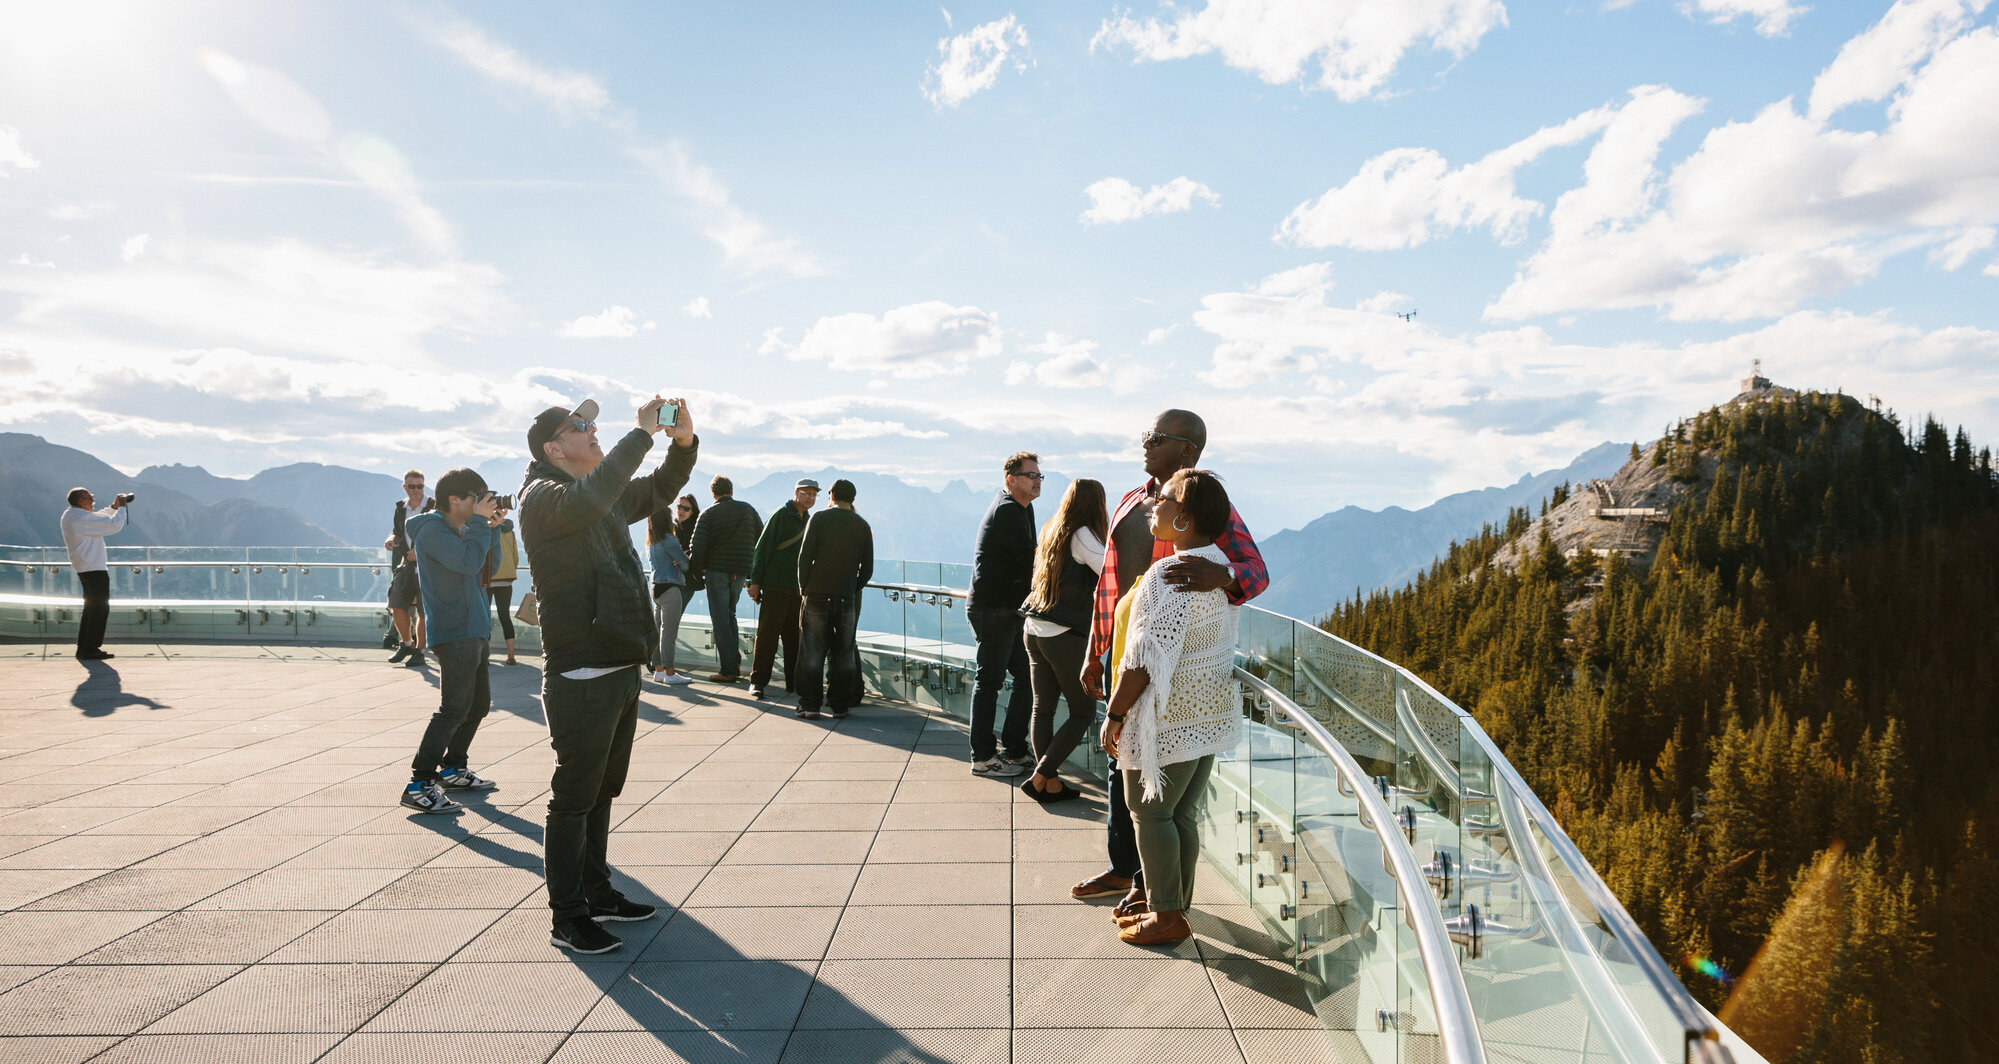 Taking a photo on the viewing deck of the Banff Gondola